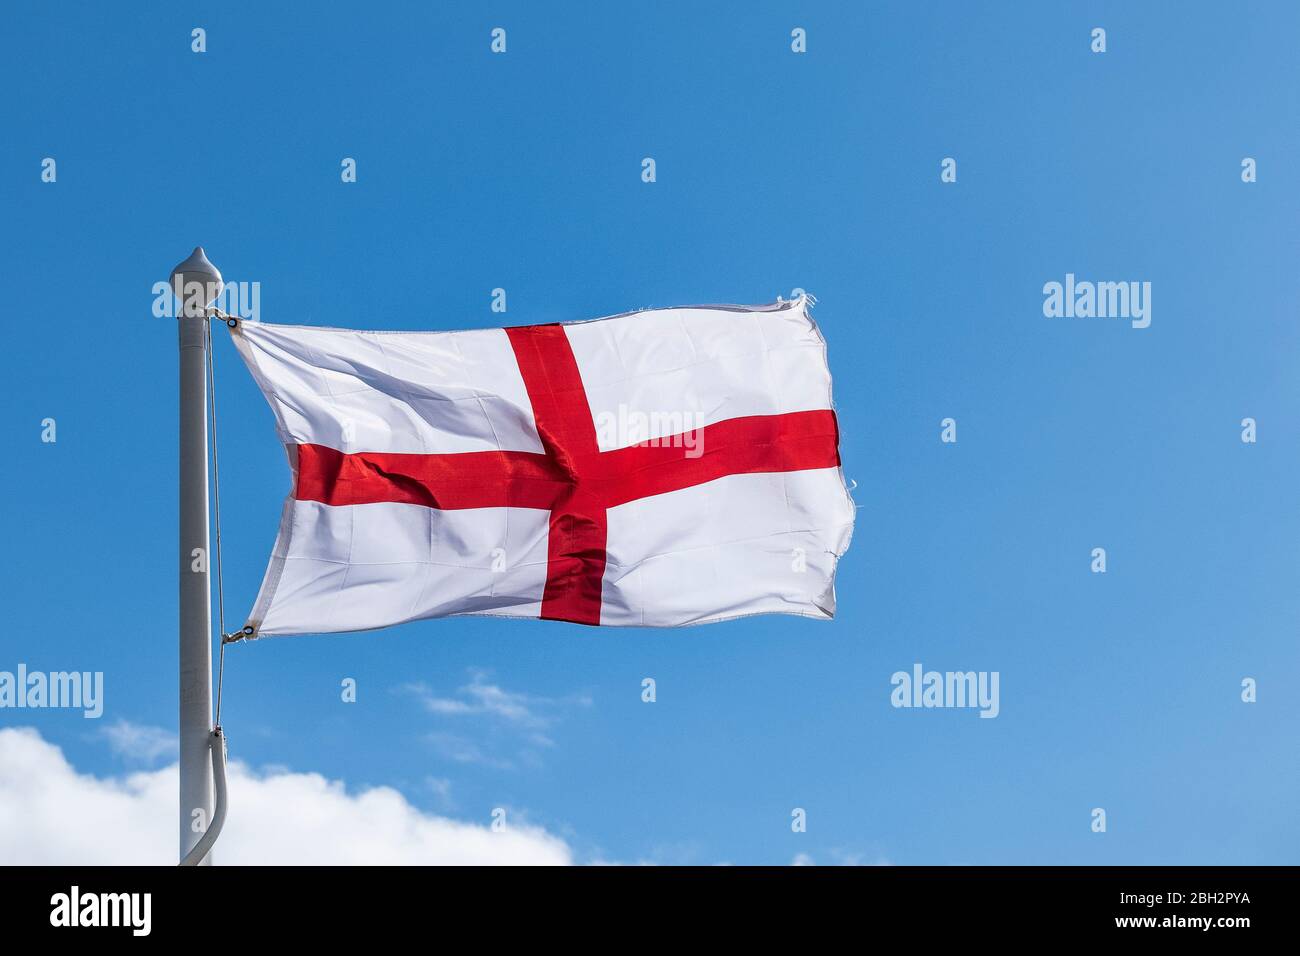 A flag of the Cross of St George fluttering in the wind seen against a blue sky. Stock Photo